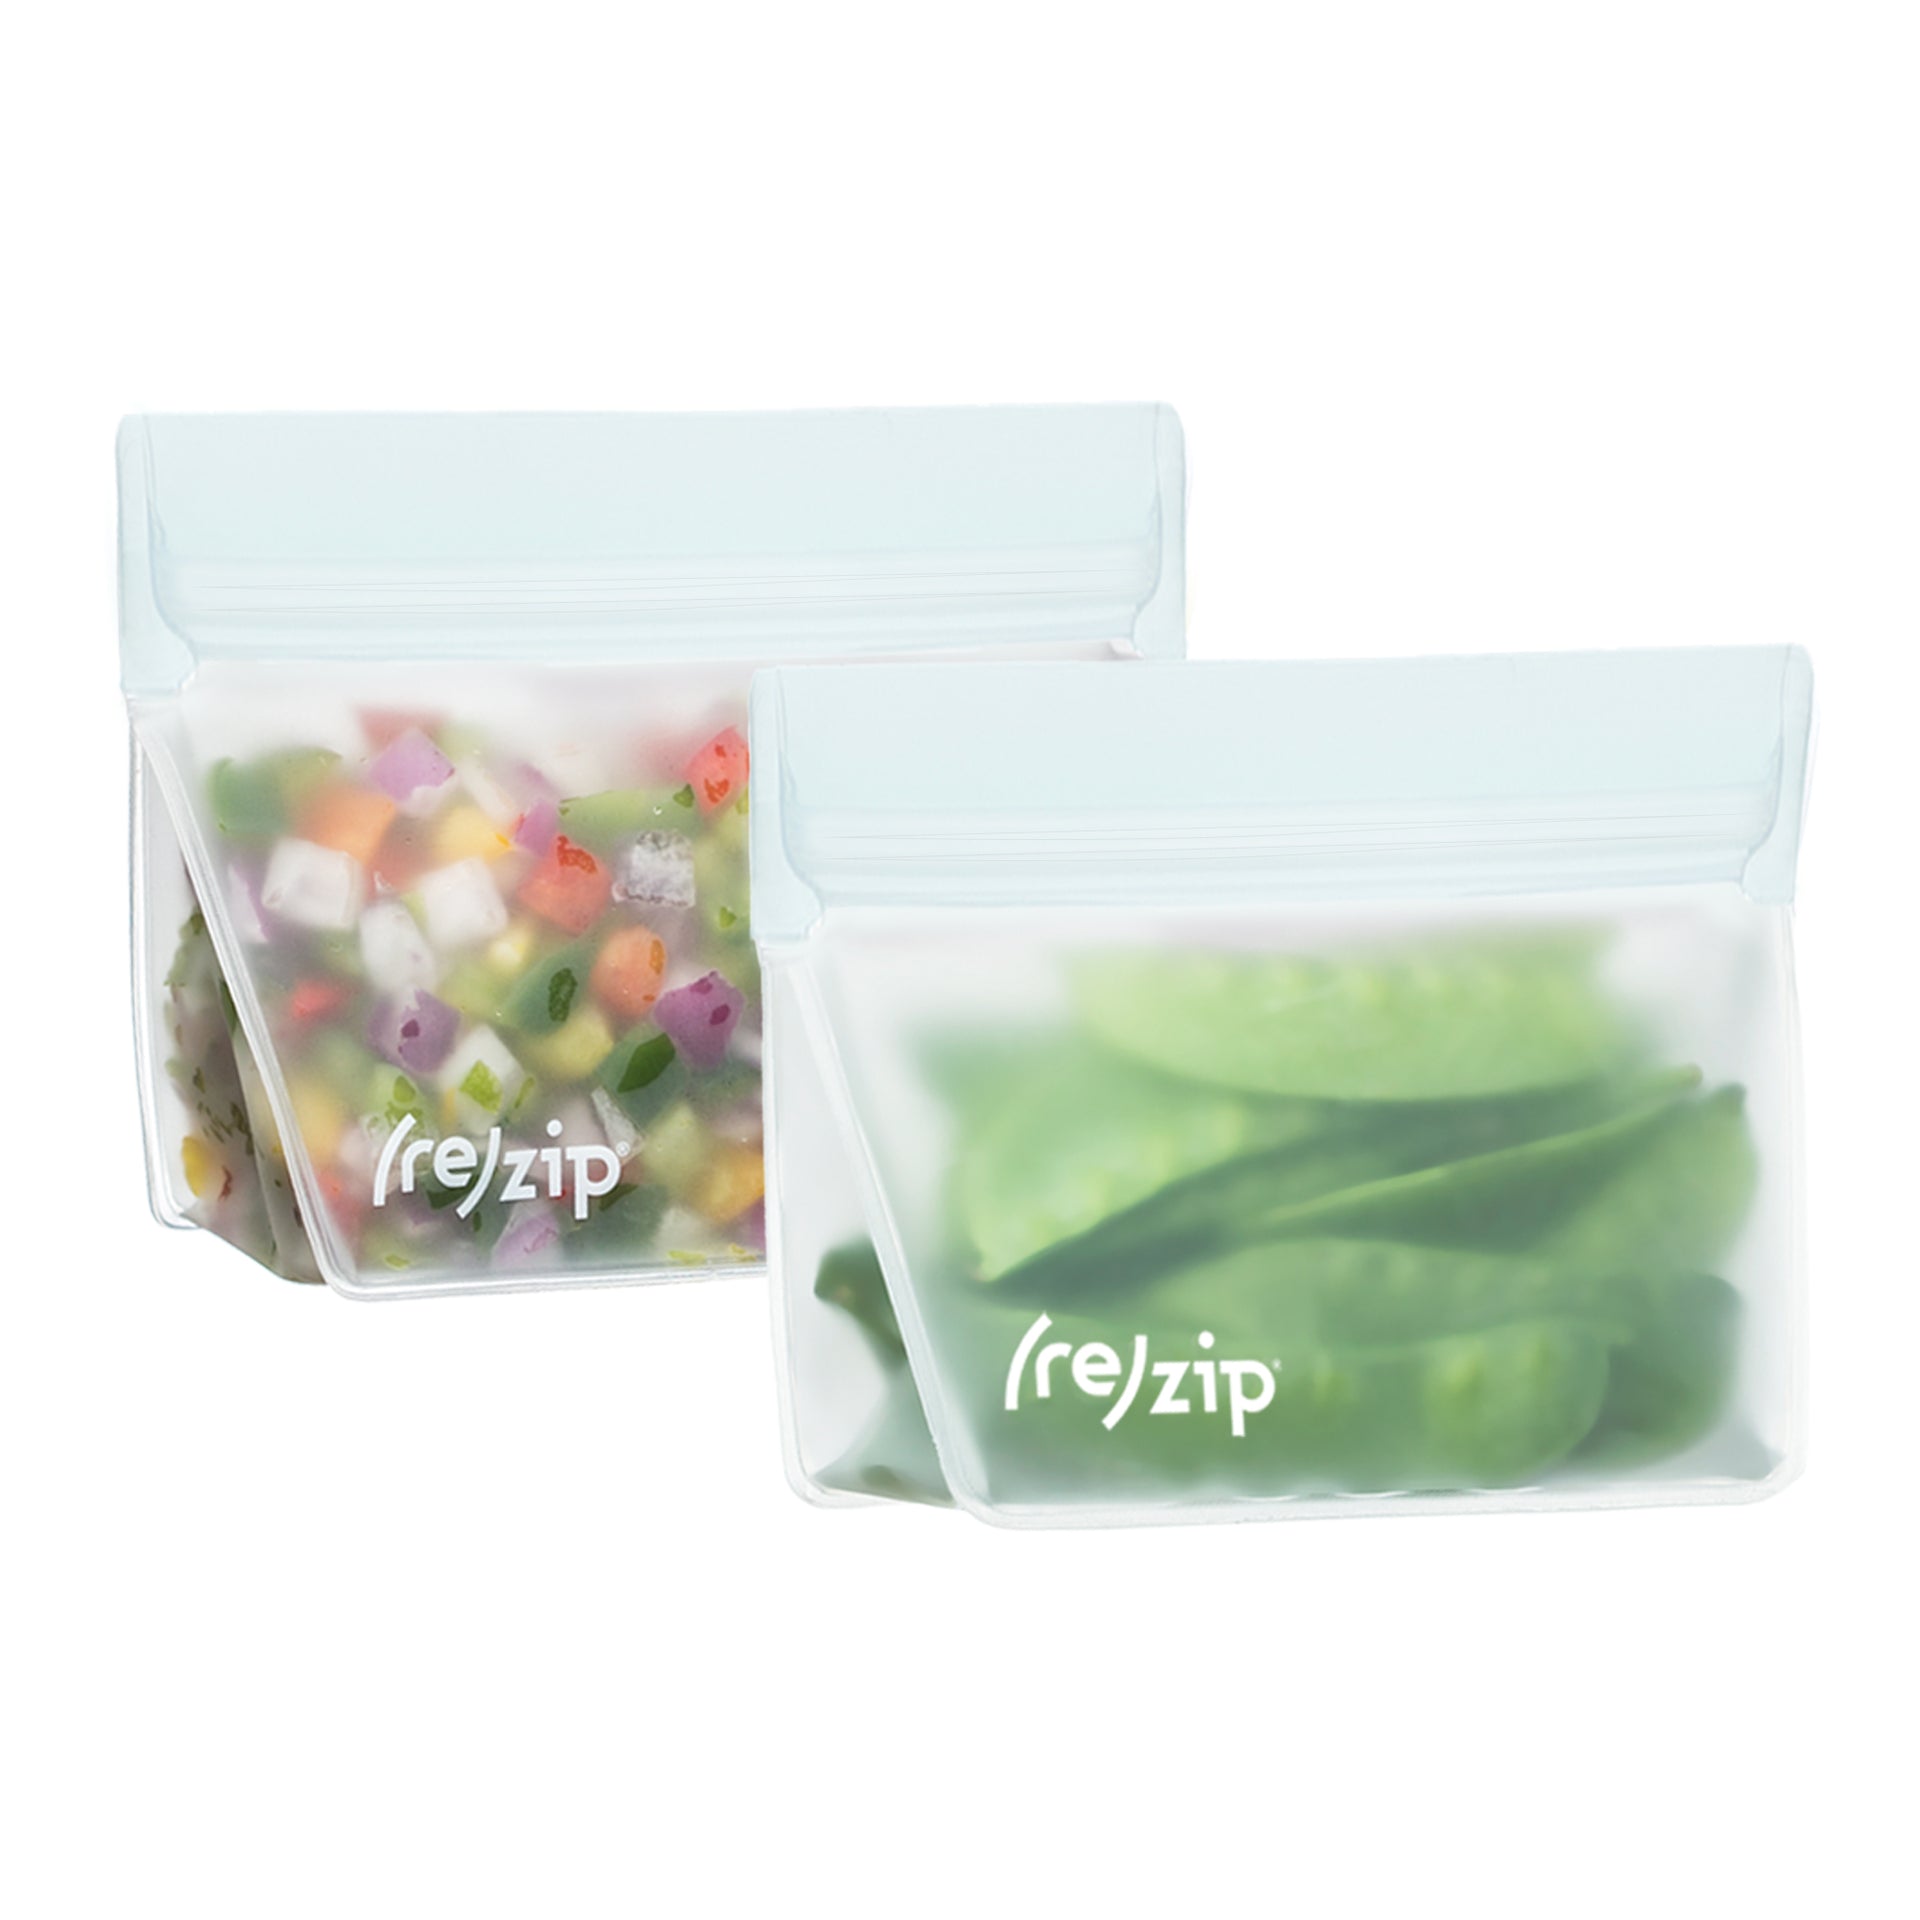 (re)zip Reusable Stand-up Snack (1 Cup) Bag, 5-Pack, Jewel Tone 5 Count